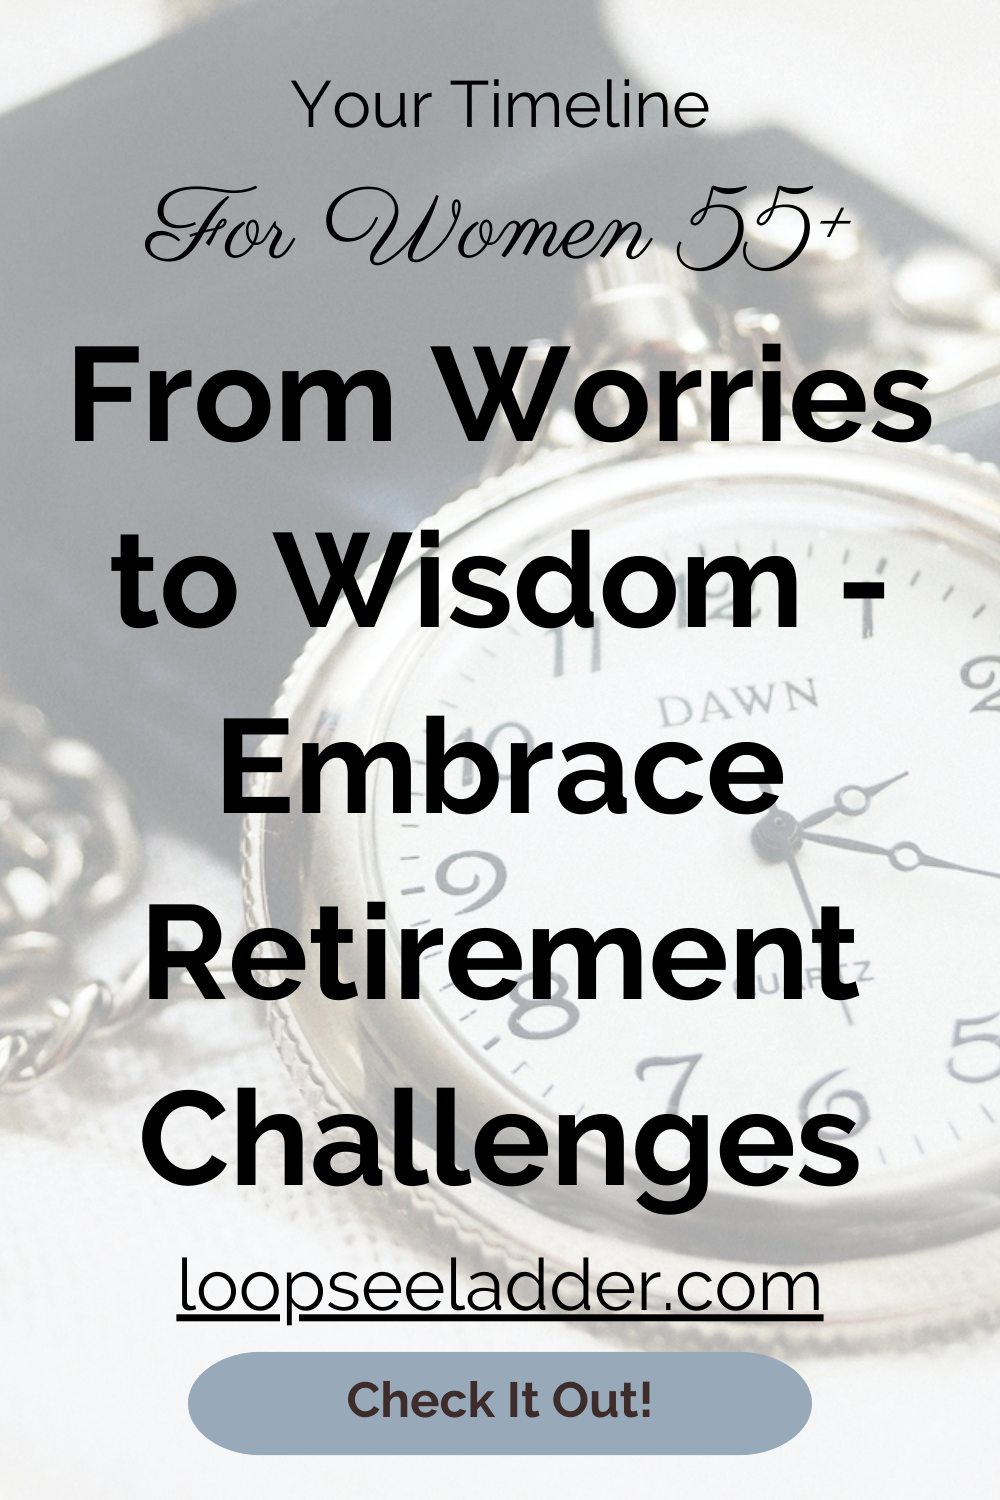 From Worries to Wisdom: How Women 55+ Embrace Retirement Challenges